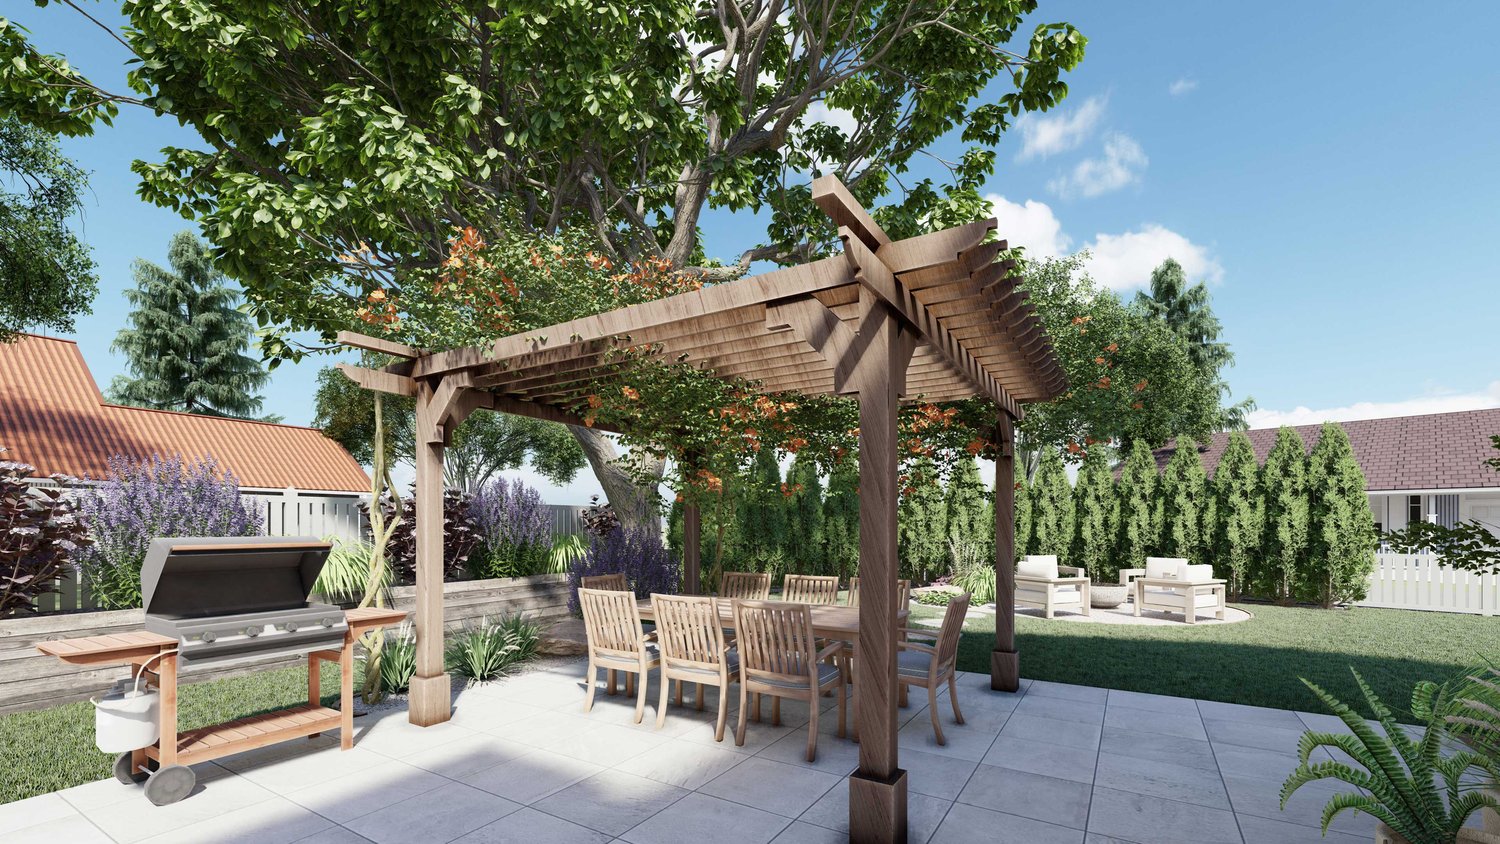 Long Island backyard showing concrete paver patio with outdoor kitchen and pergola above dining area, alongside trees and plant, with fire pit seating area on a lawn